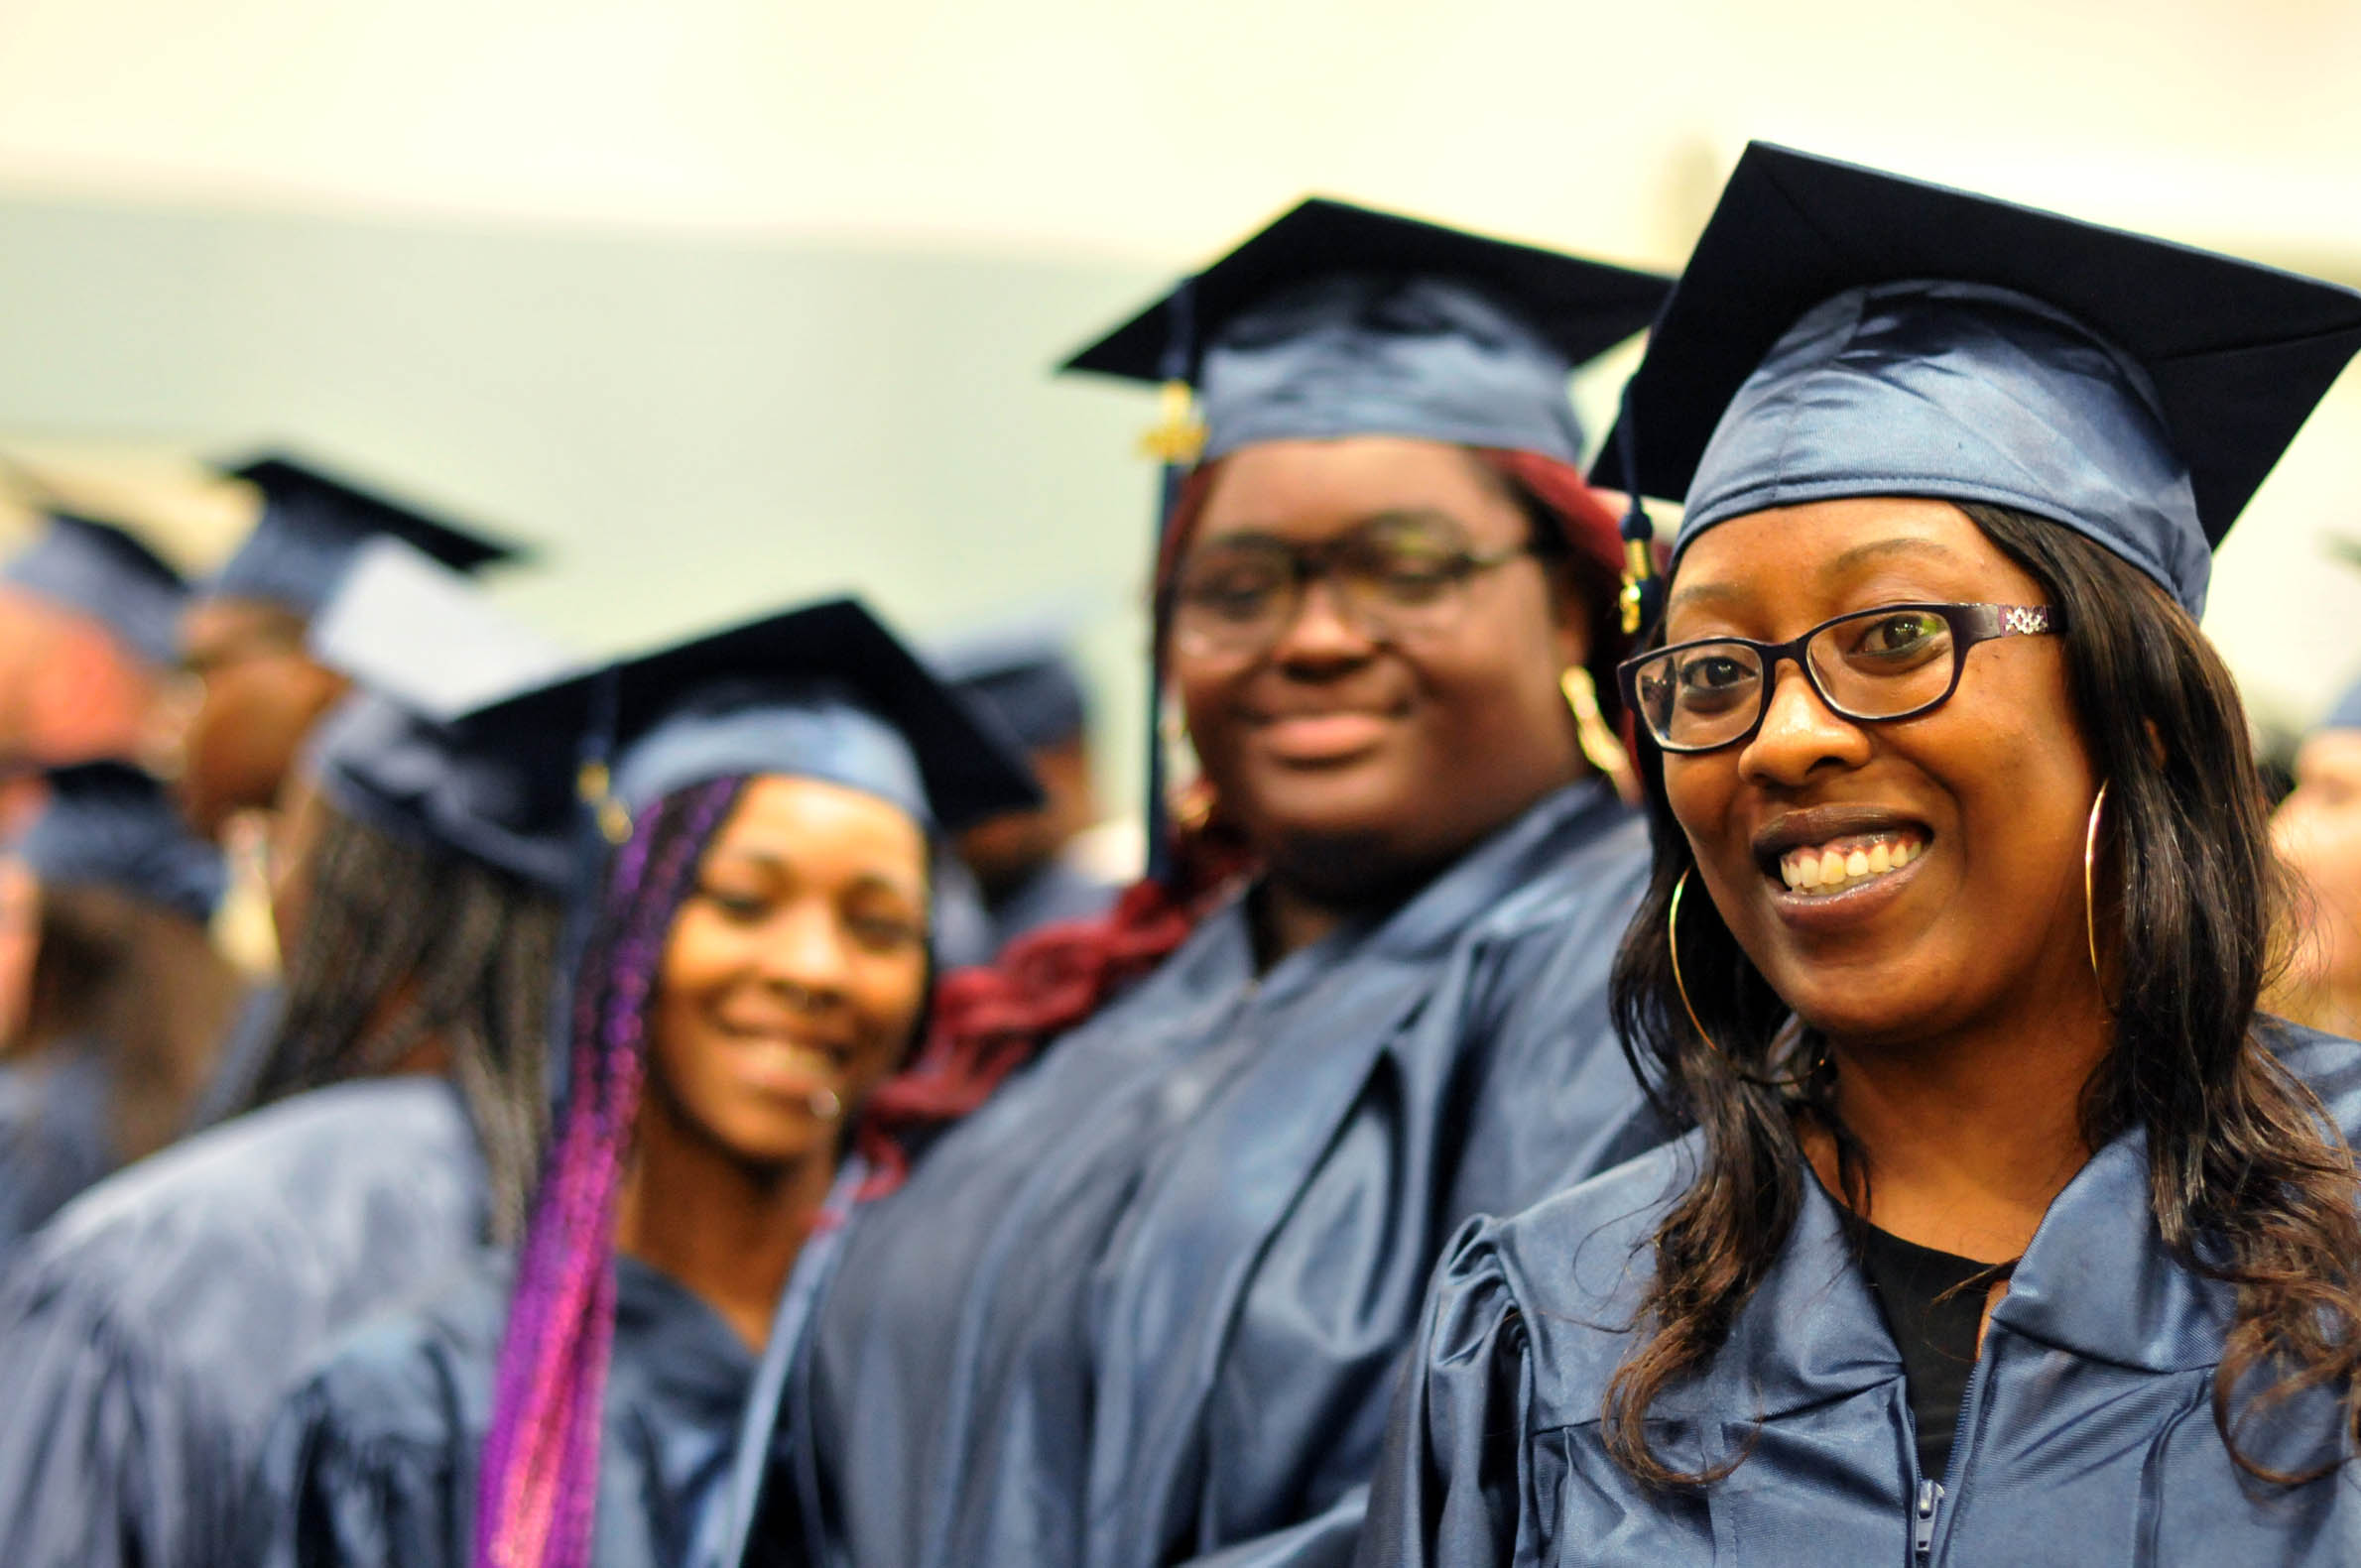 CCCC holds College and Career Readiness Graduation